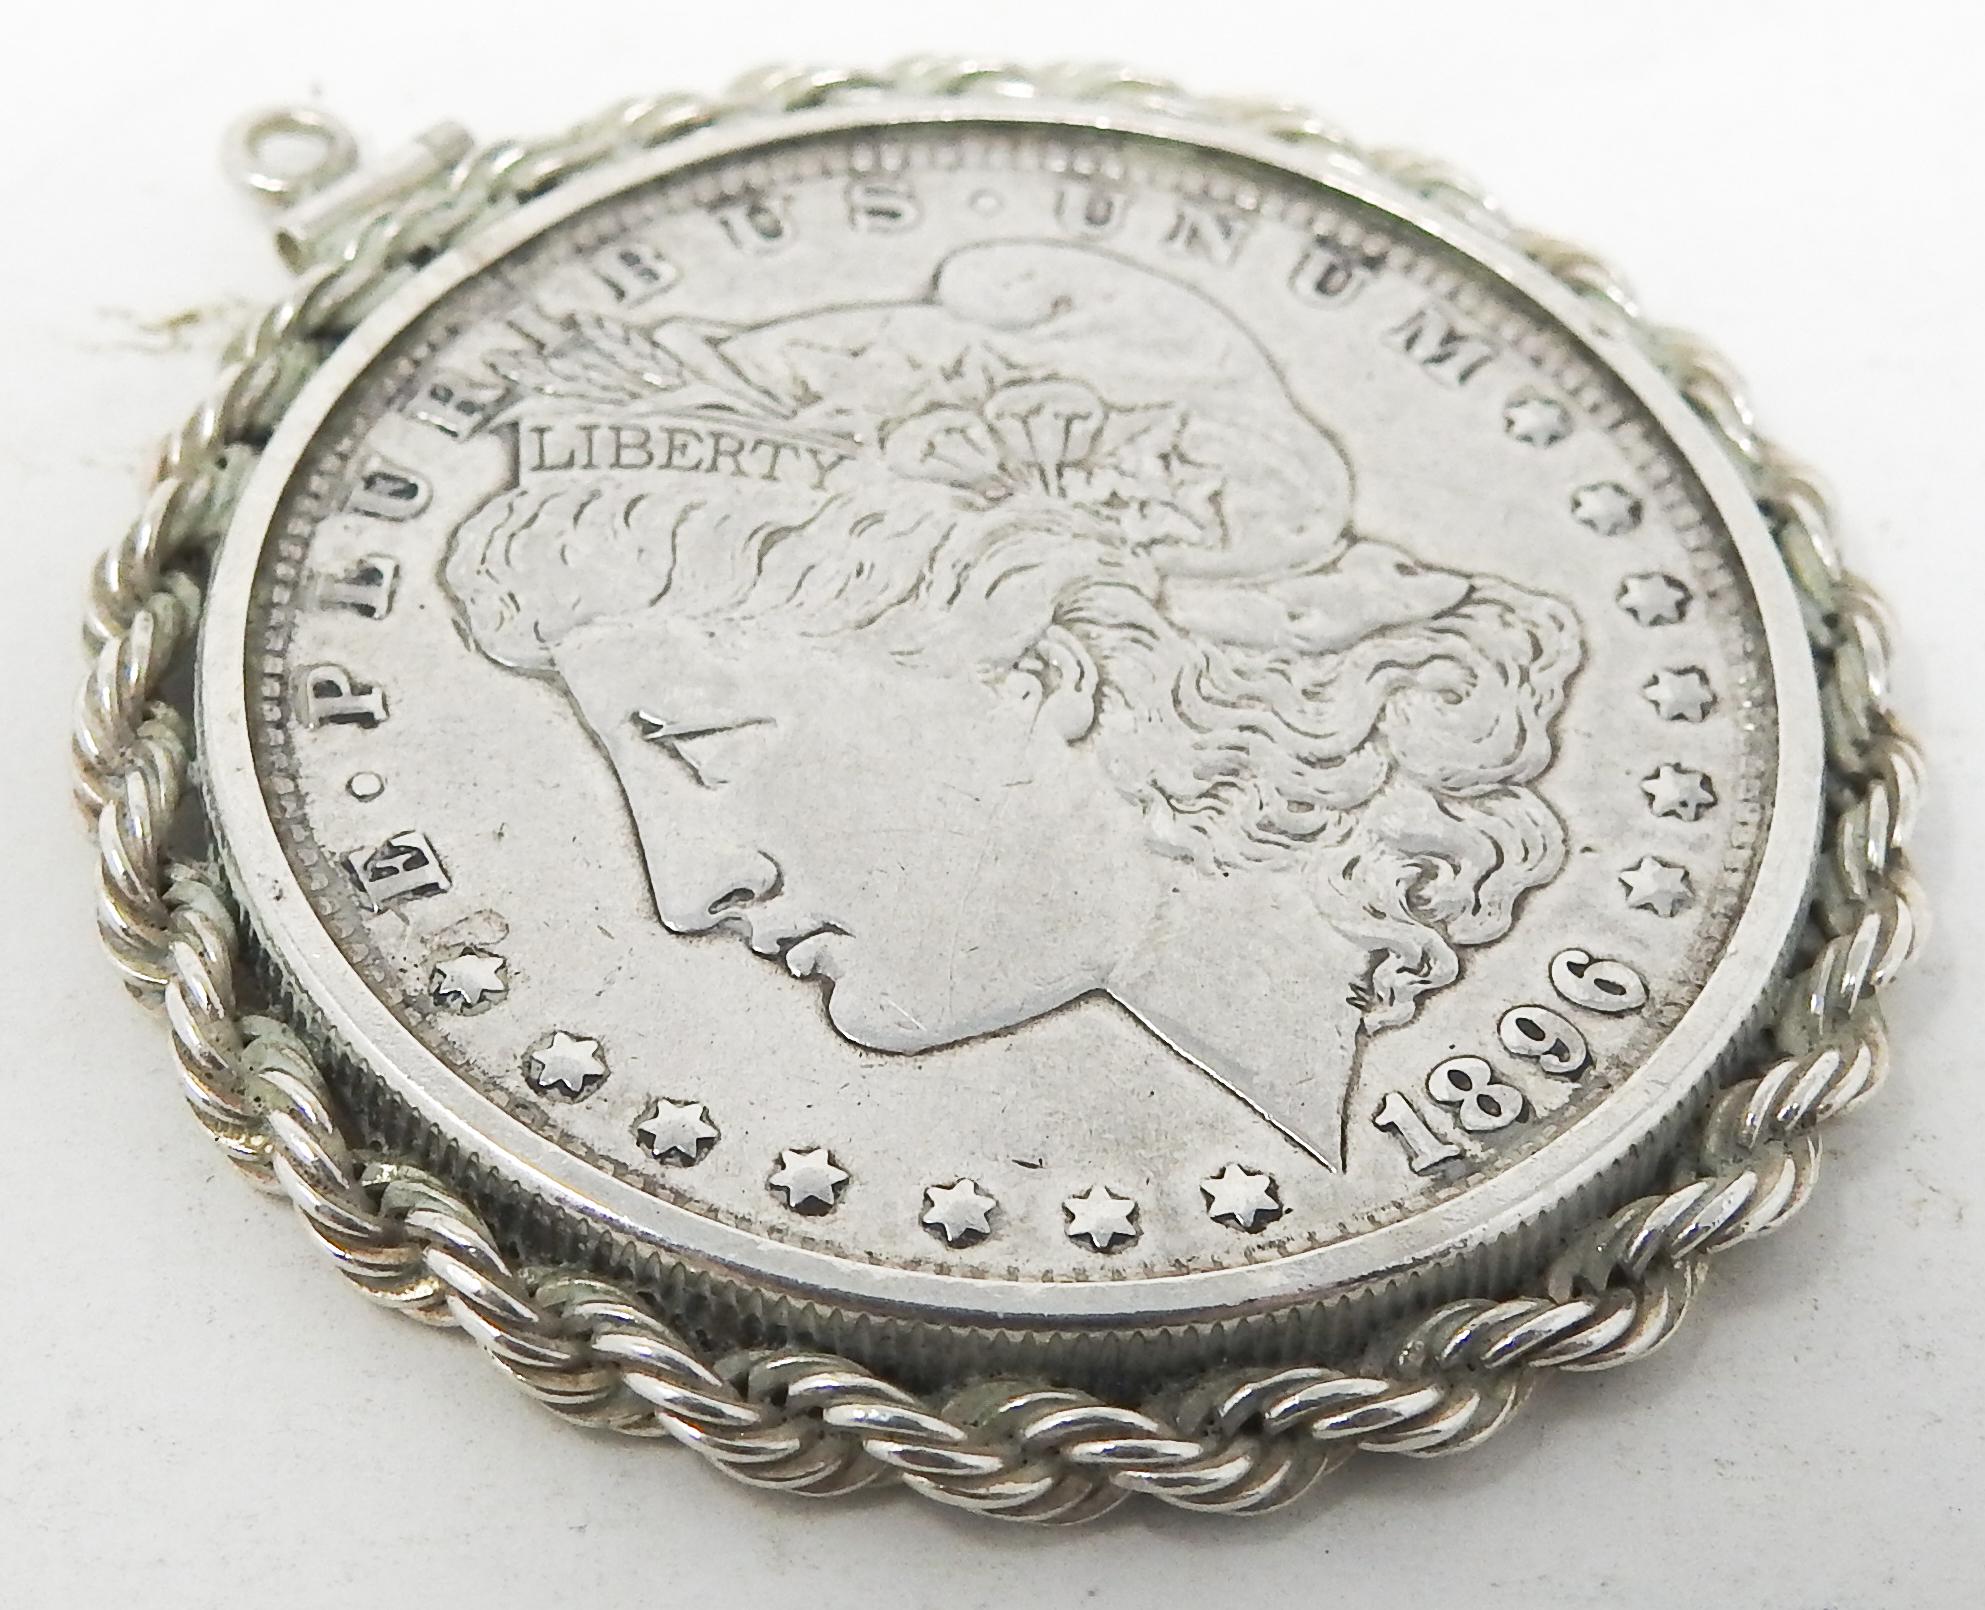 Offering this beautiful sterling silver coin pendant. The coin is from 1896, E. Pluribus Unum is on the front with Anna Willess Williams profile. The back has United States of America, In God we Trust, One Dollar with the Eagle and its wings